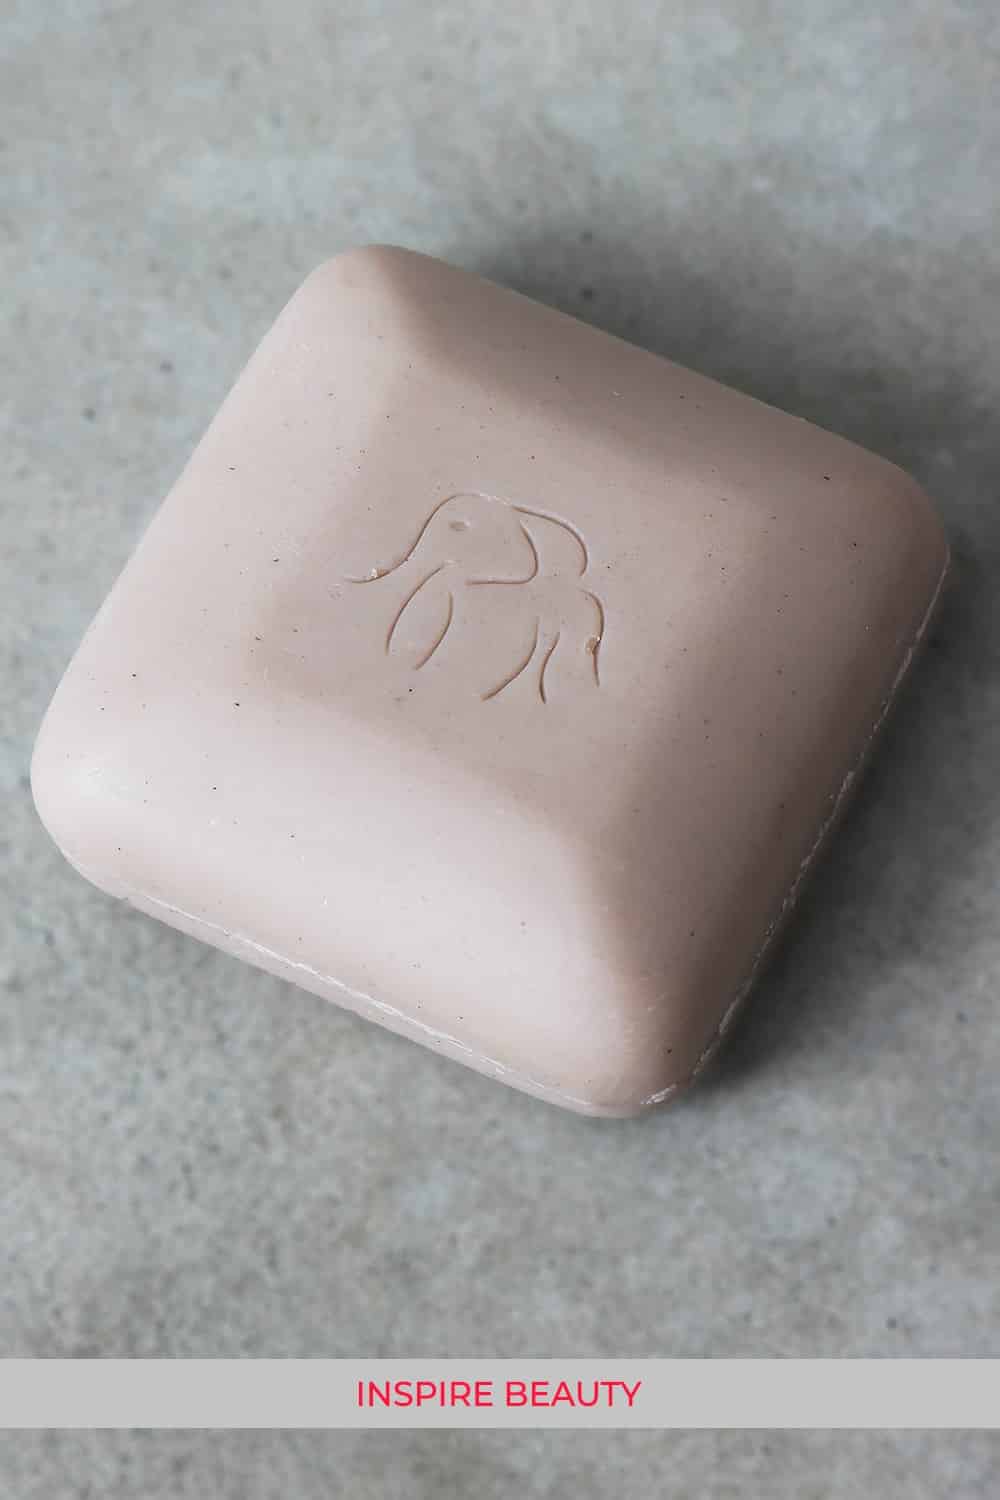 Drunk Elephant Juju Bar review, this is a mild exfoliating cleansing bar, not only good for the face but body too.